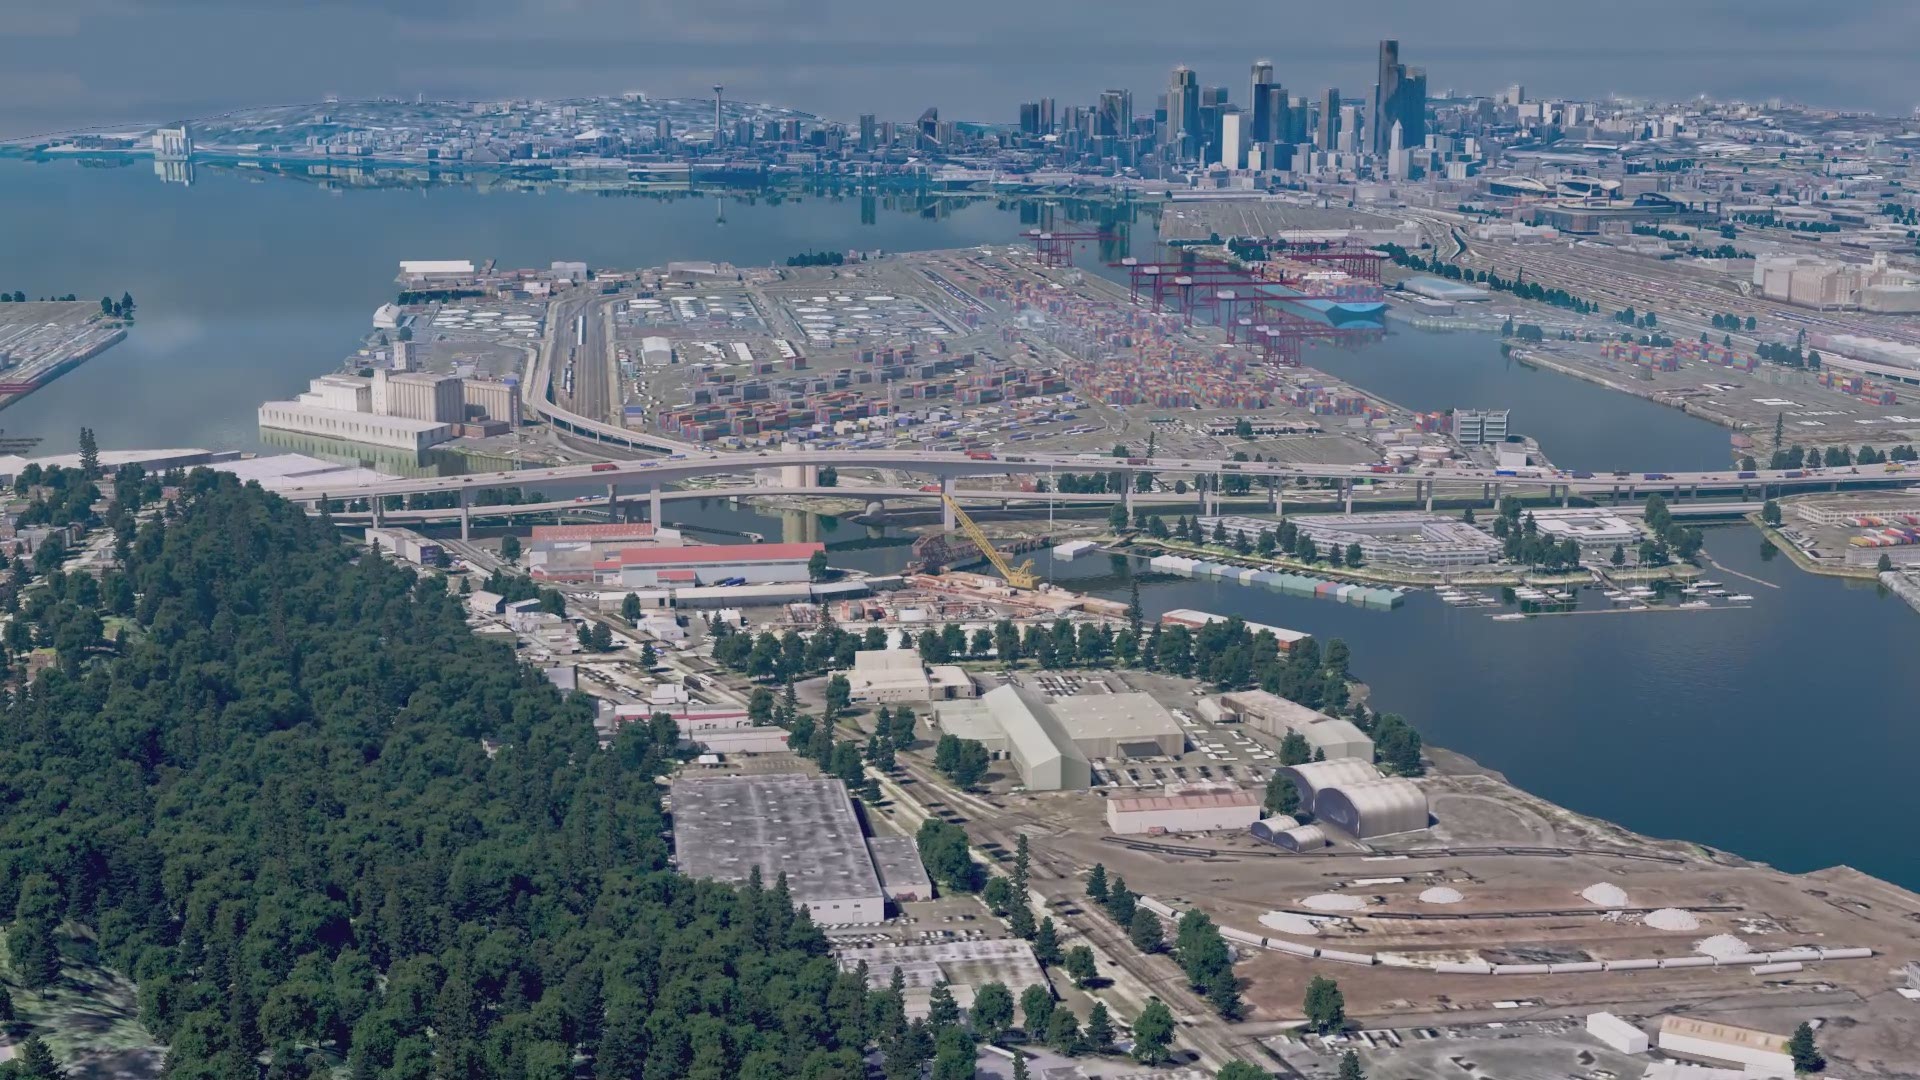 HNTB, an engineering firm, proposed using some of the old West Seattle bridge structure and lift pre-built arches into place to cross the Duwamish River.